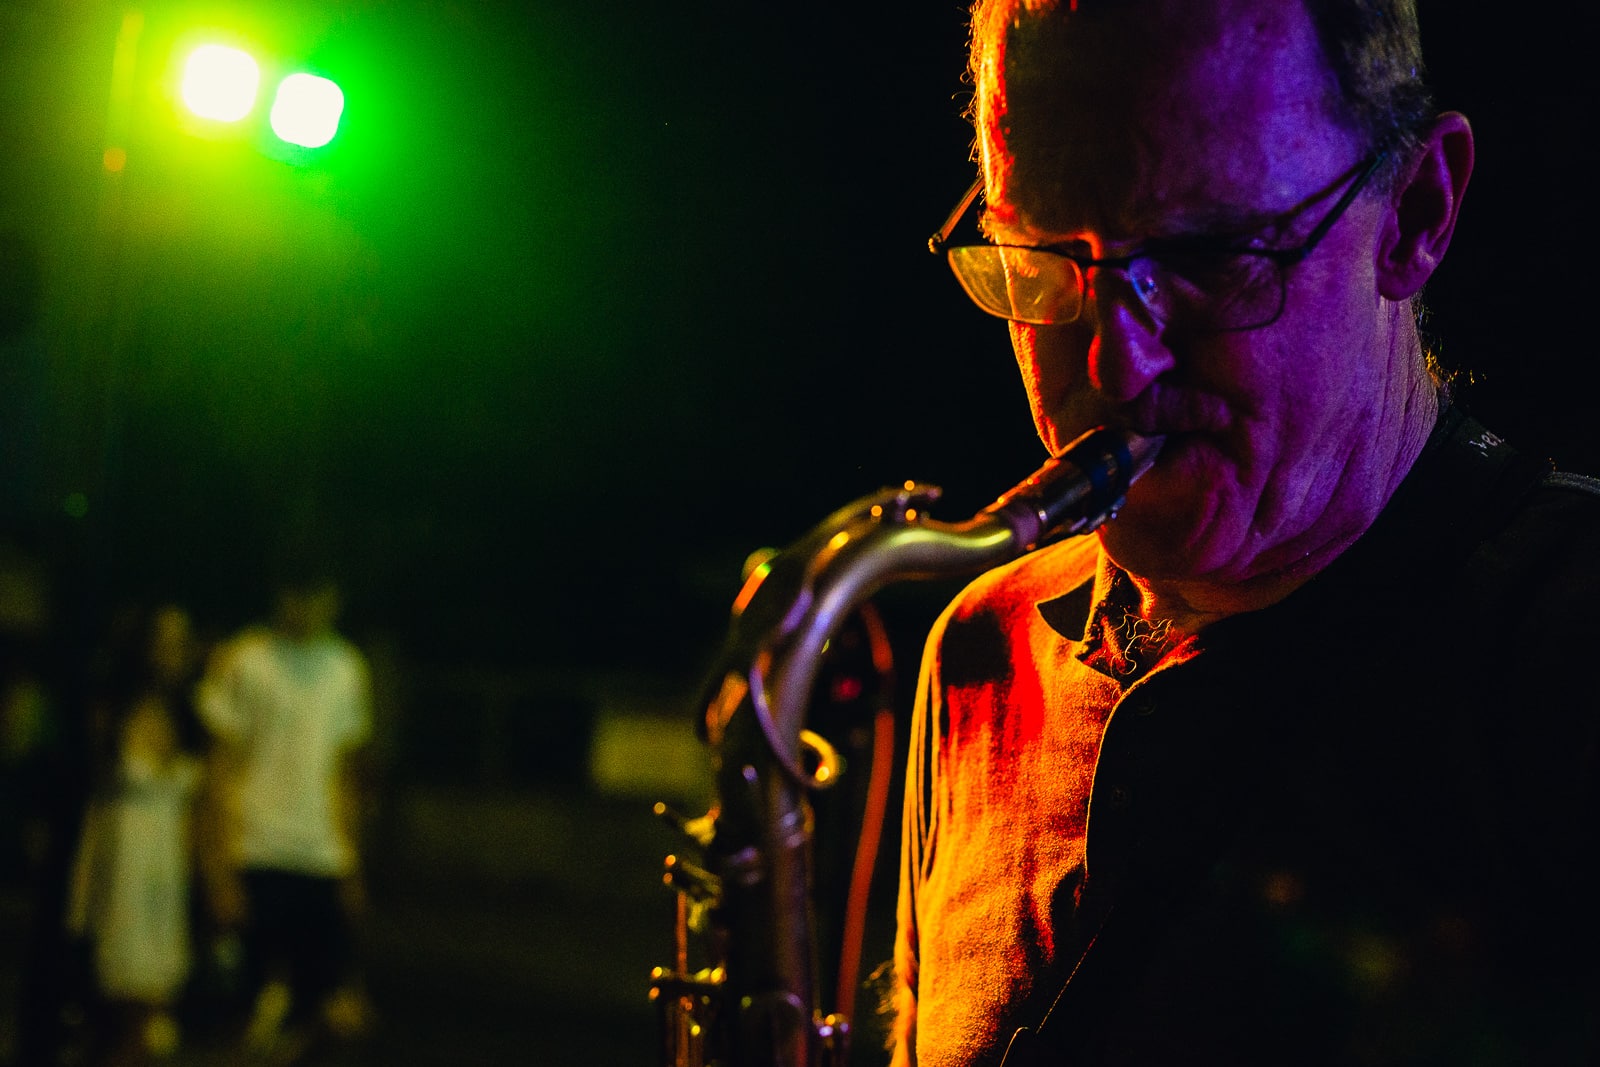 A close-up of a musician playing the saxophone